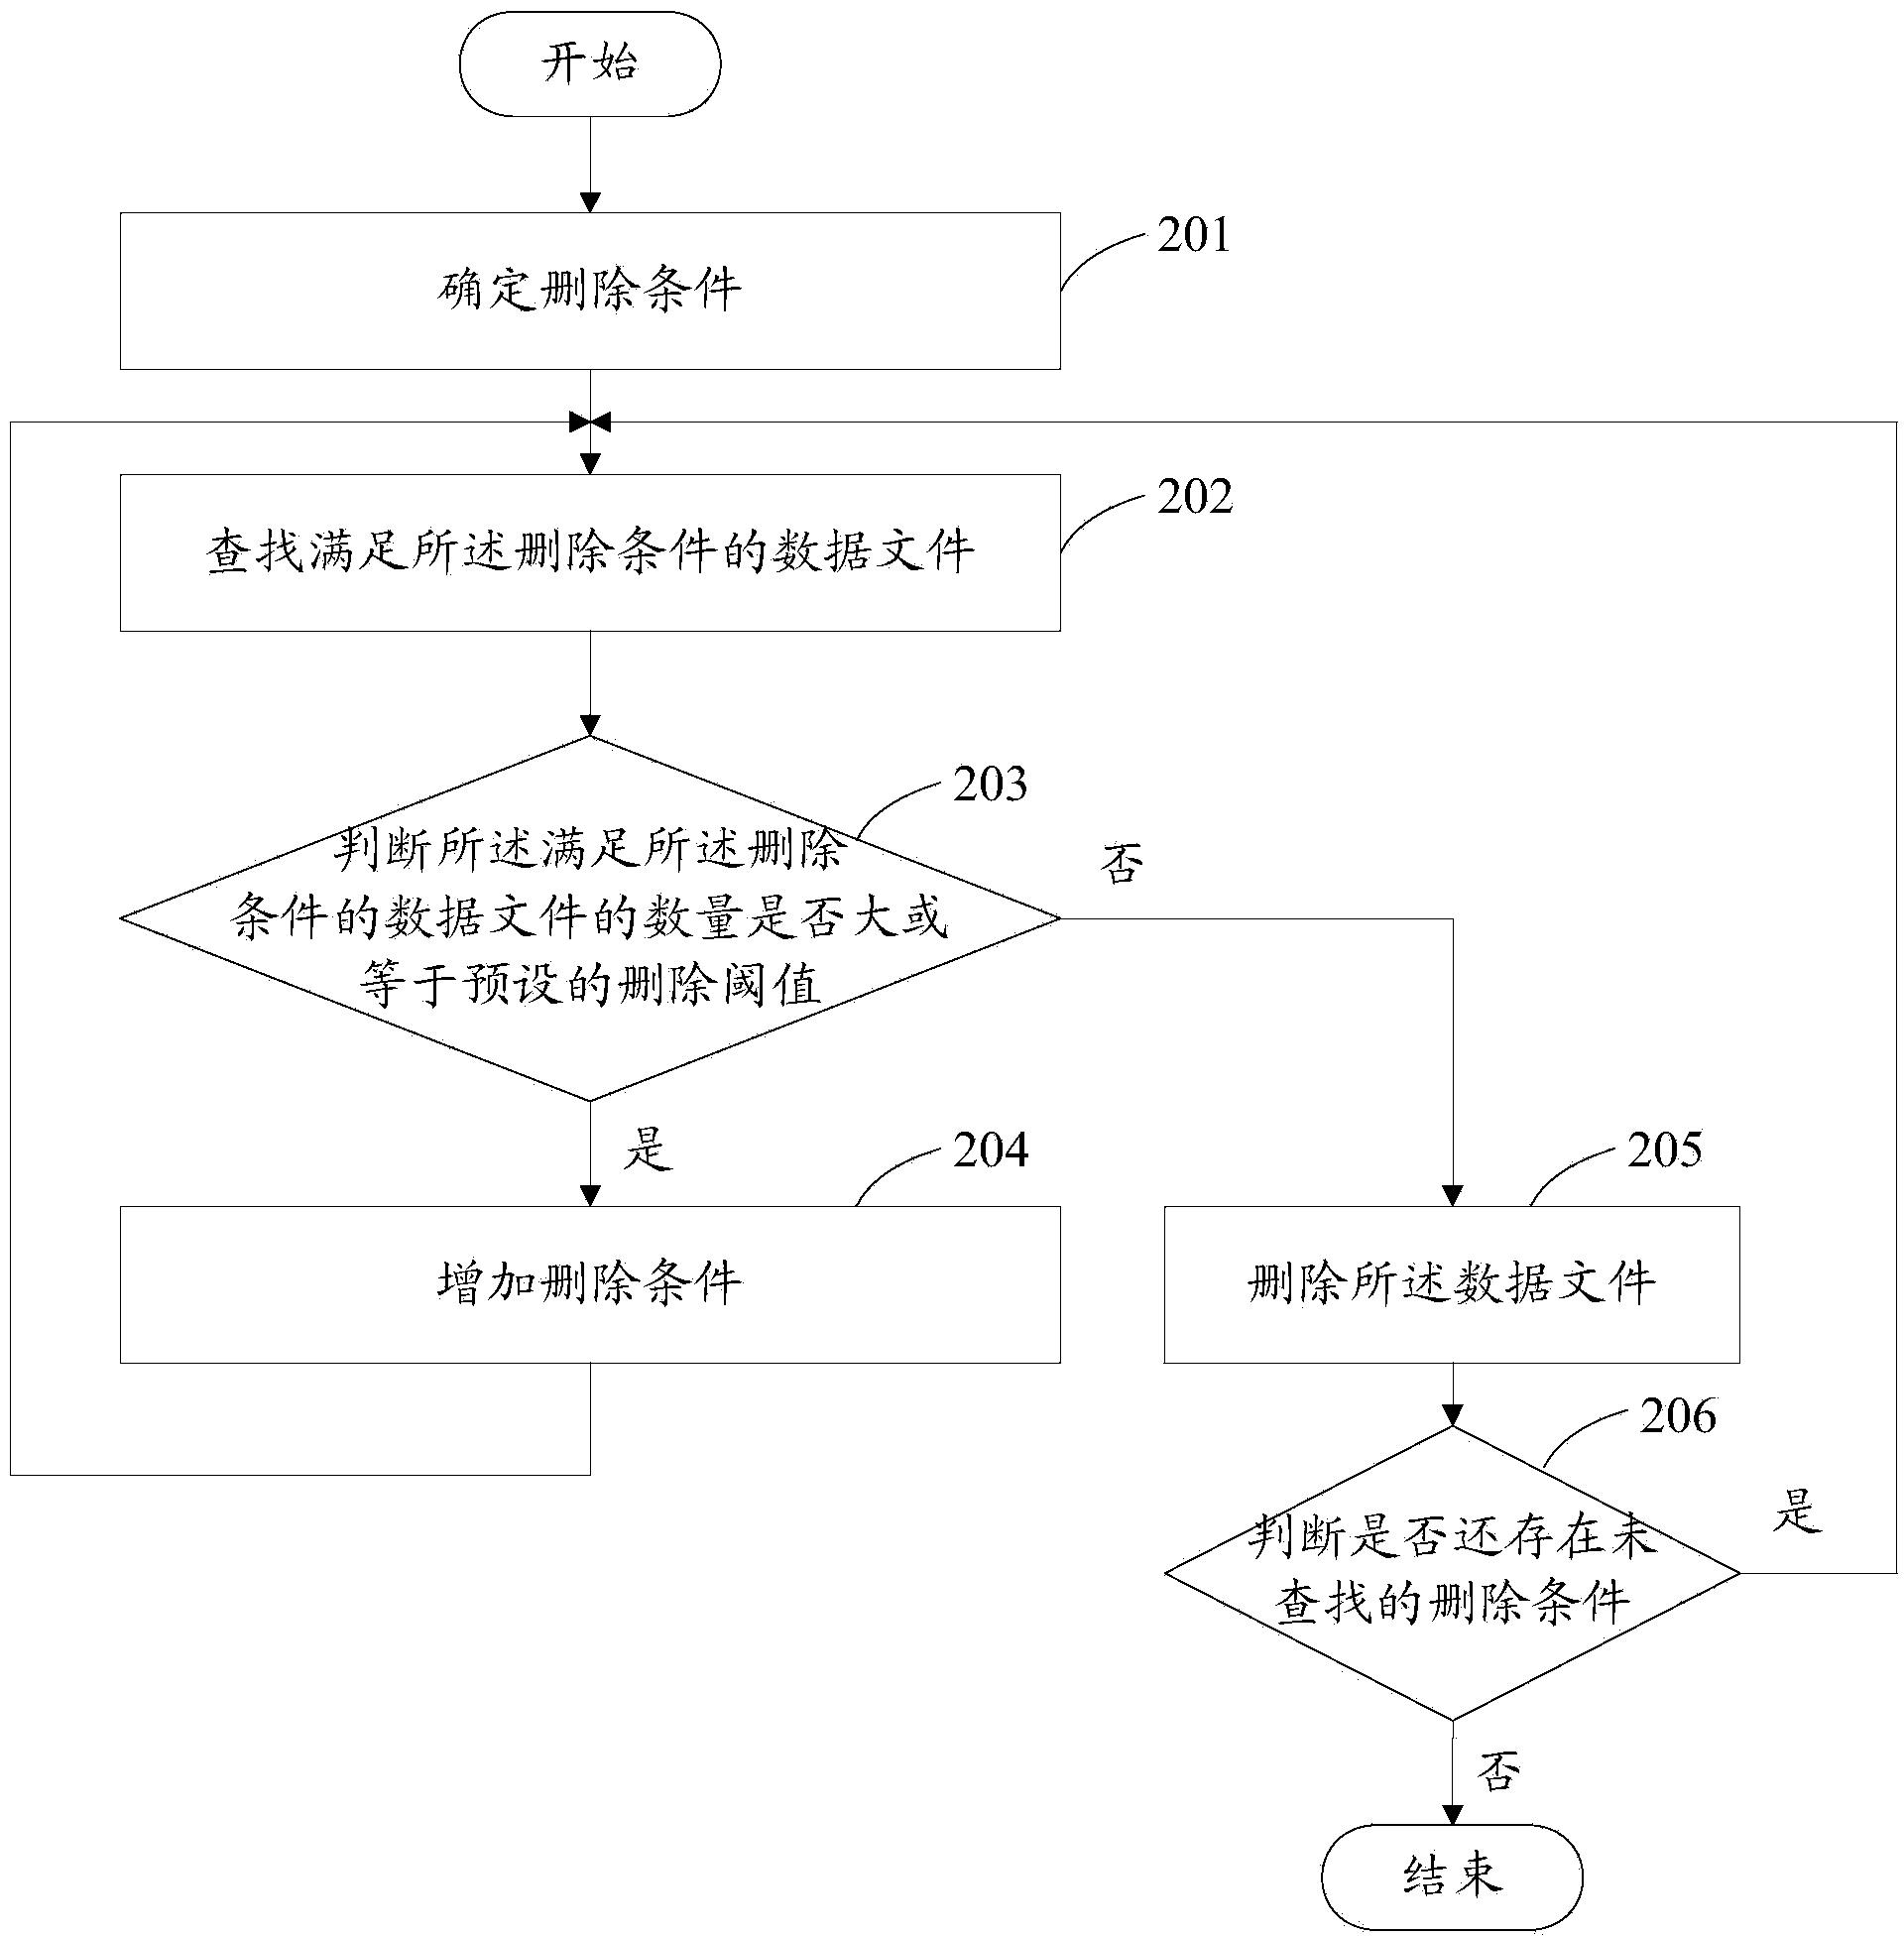 Method and system for deleting data files